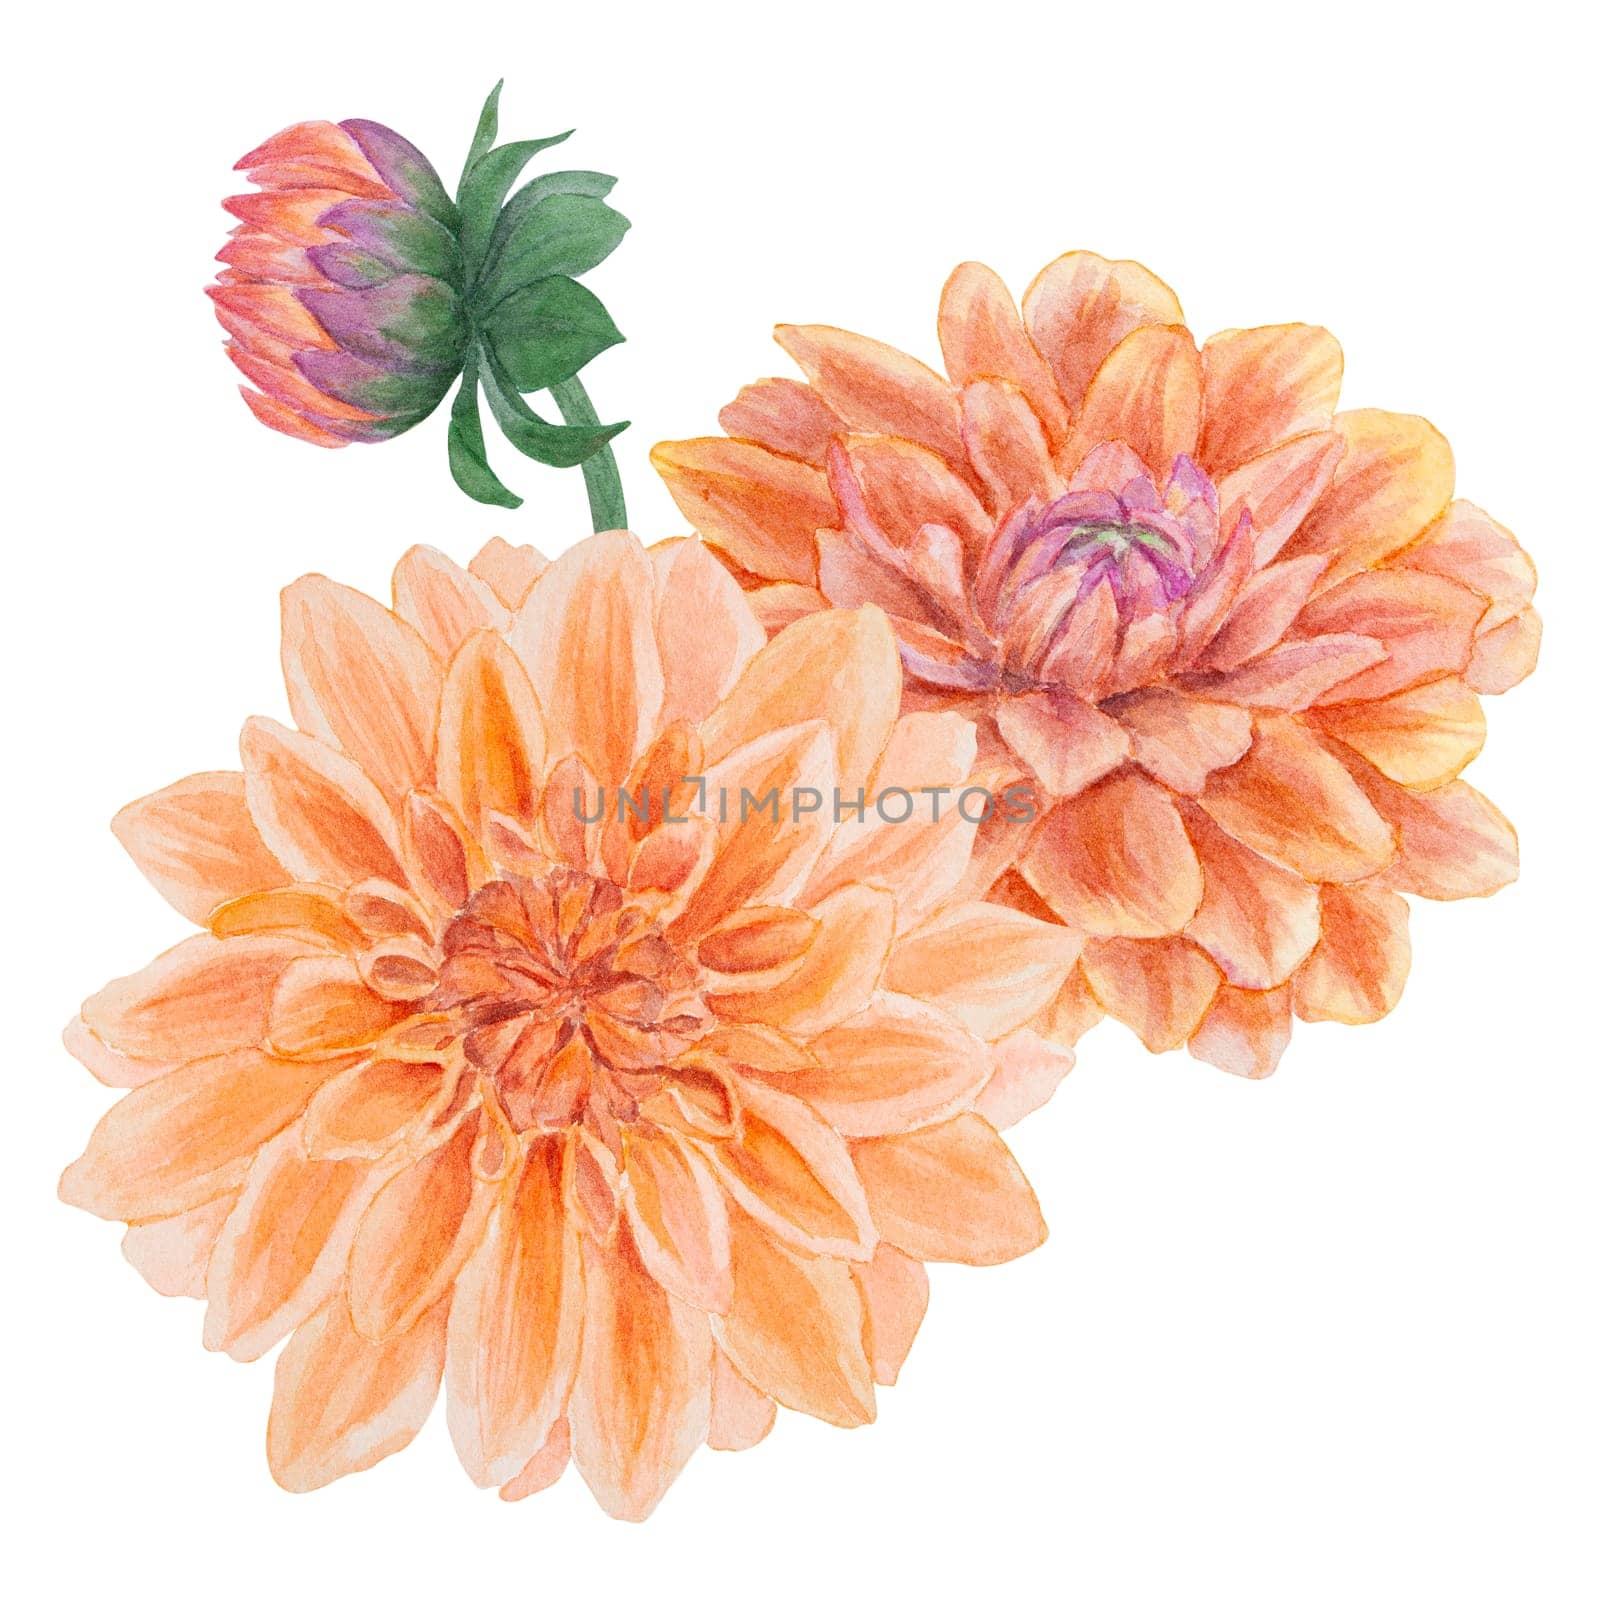 Orange dahlia watercolor illustration. Hand drawn botanical painting, floral sketch. Colorful flower clipart for summer or autumn design of wedding invitation, prints, greetings, sublimation, textile by florainlove_art